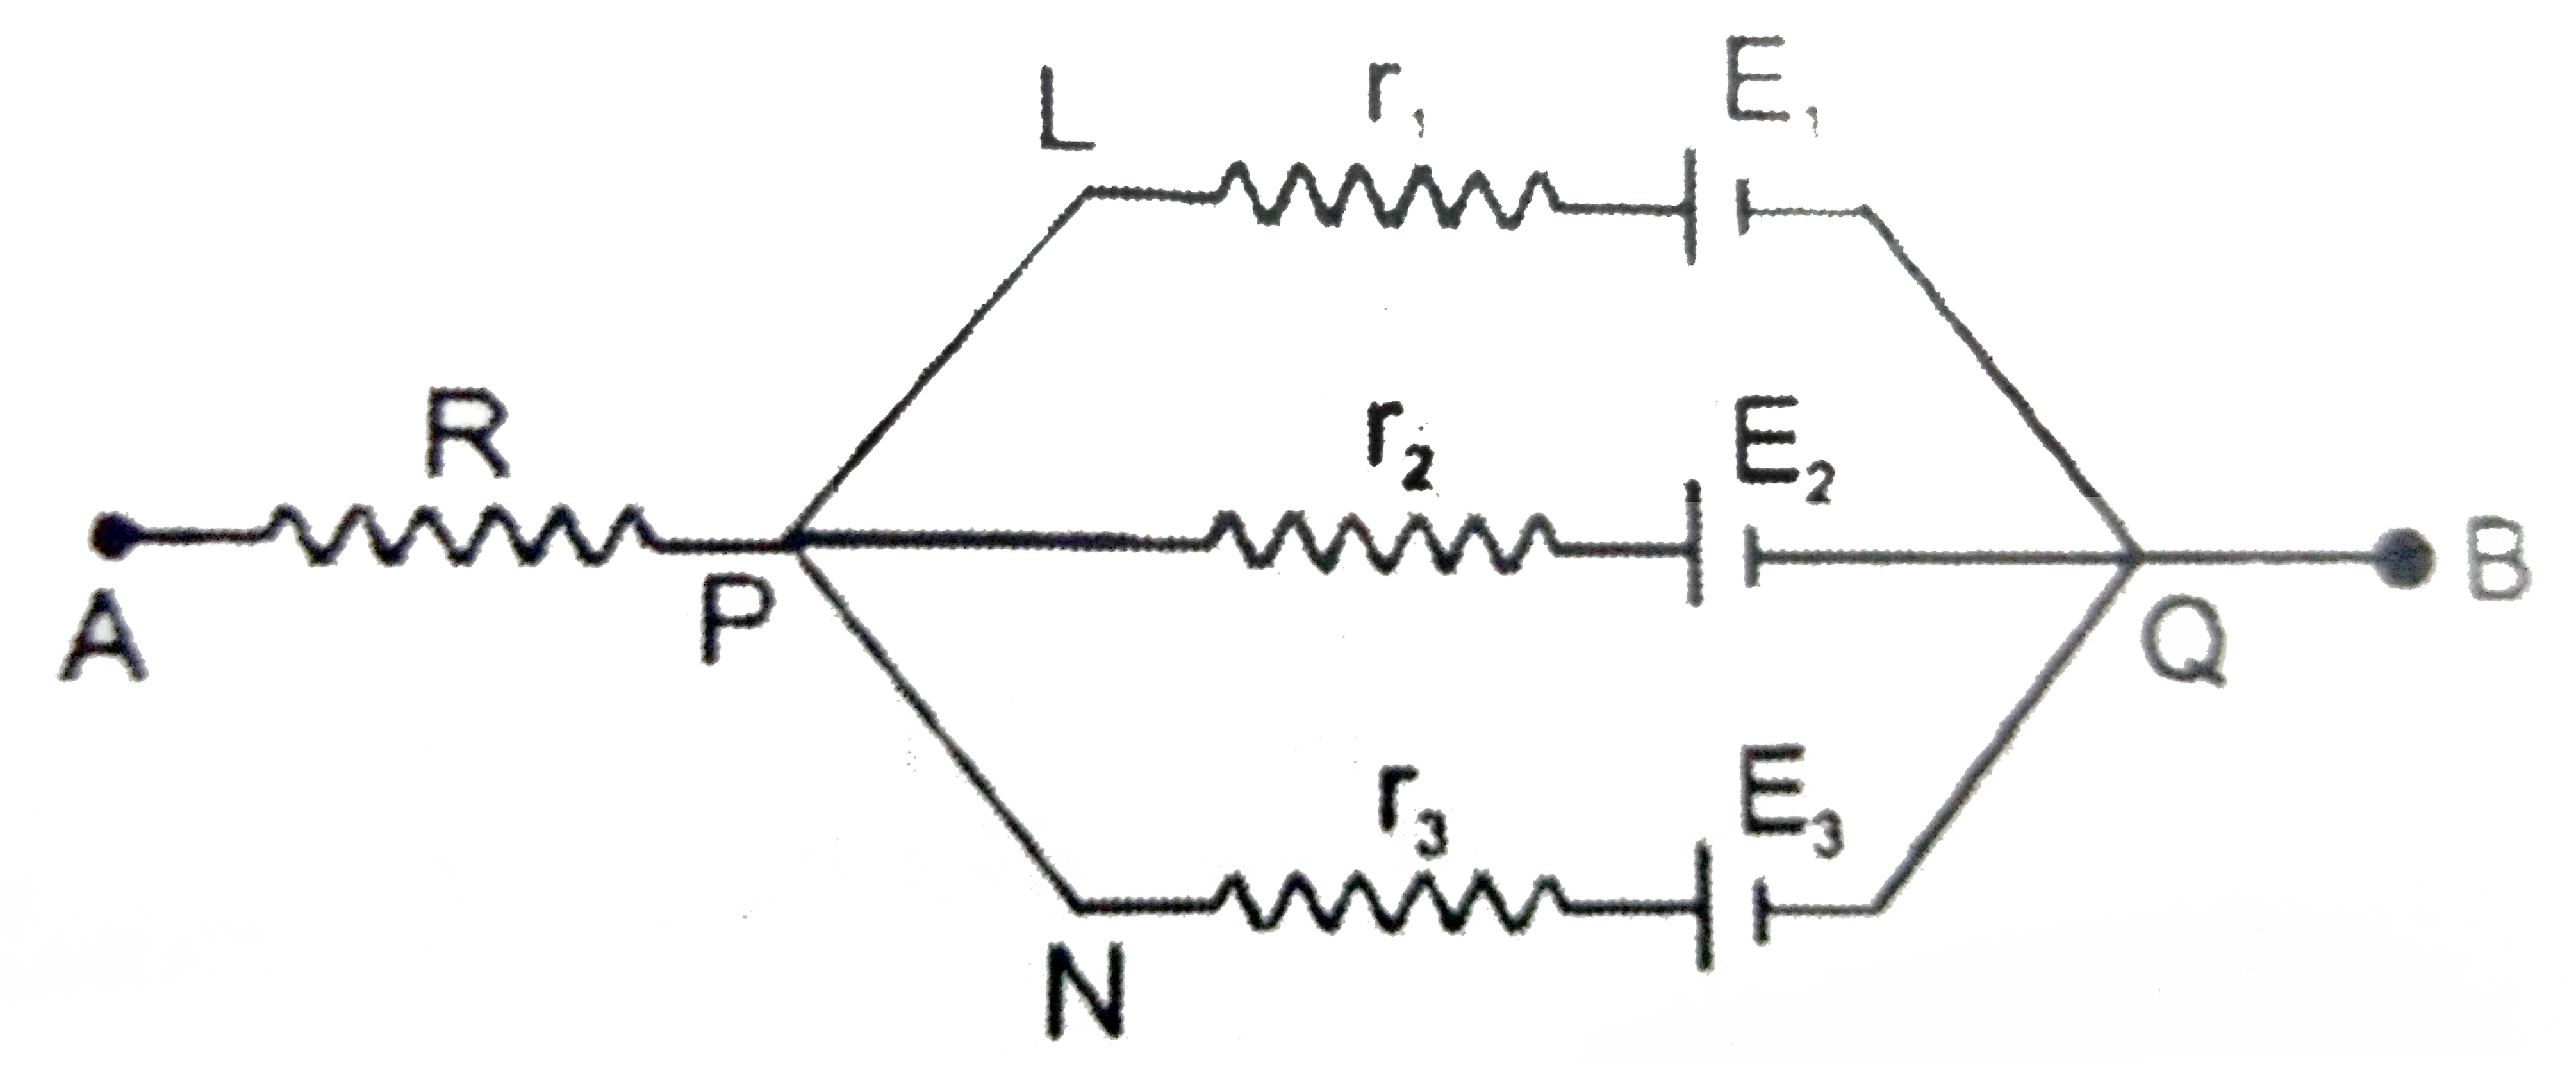 In the circuit shown in fig. E(1)=3